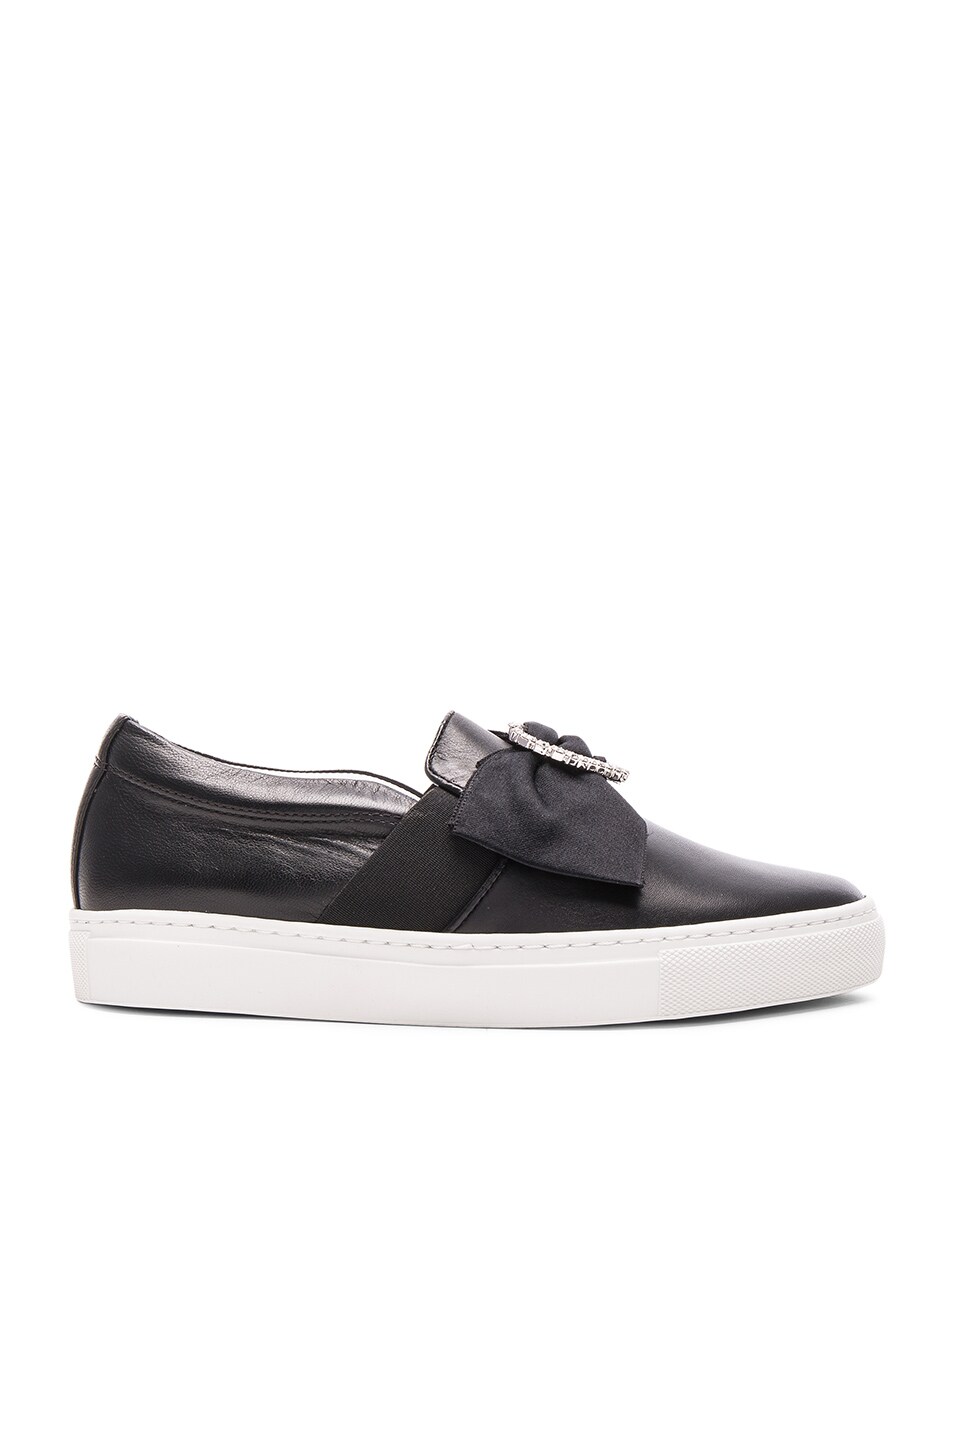 Image 1 of Lanvin Bow & Heart Leather Slip On Sneakers in Black